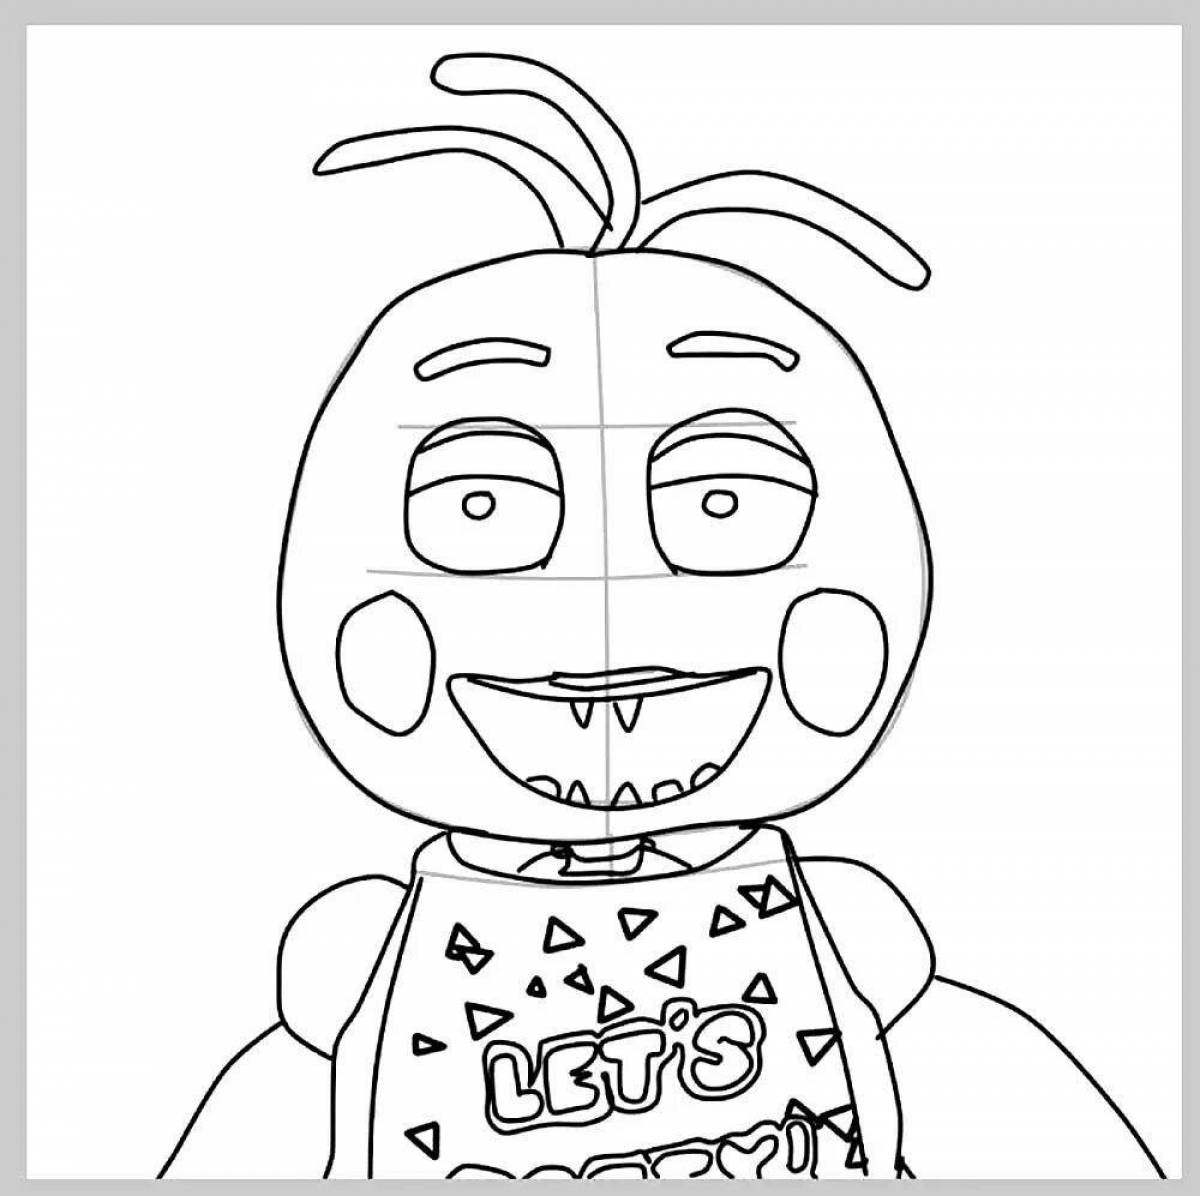 Colouring bright chica fnaf